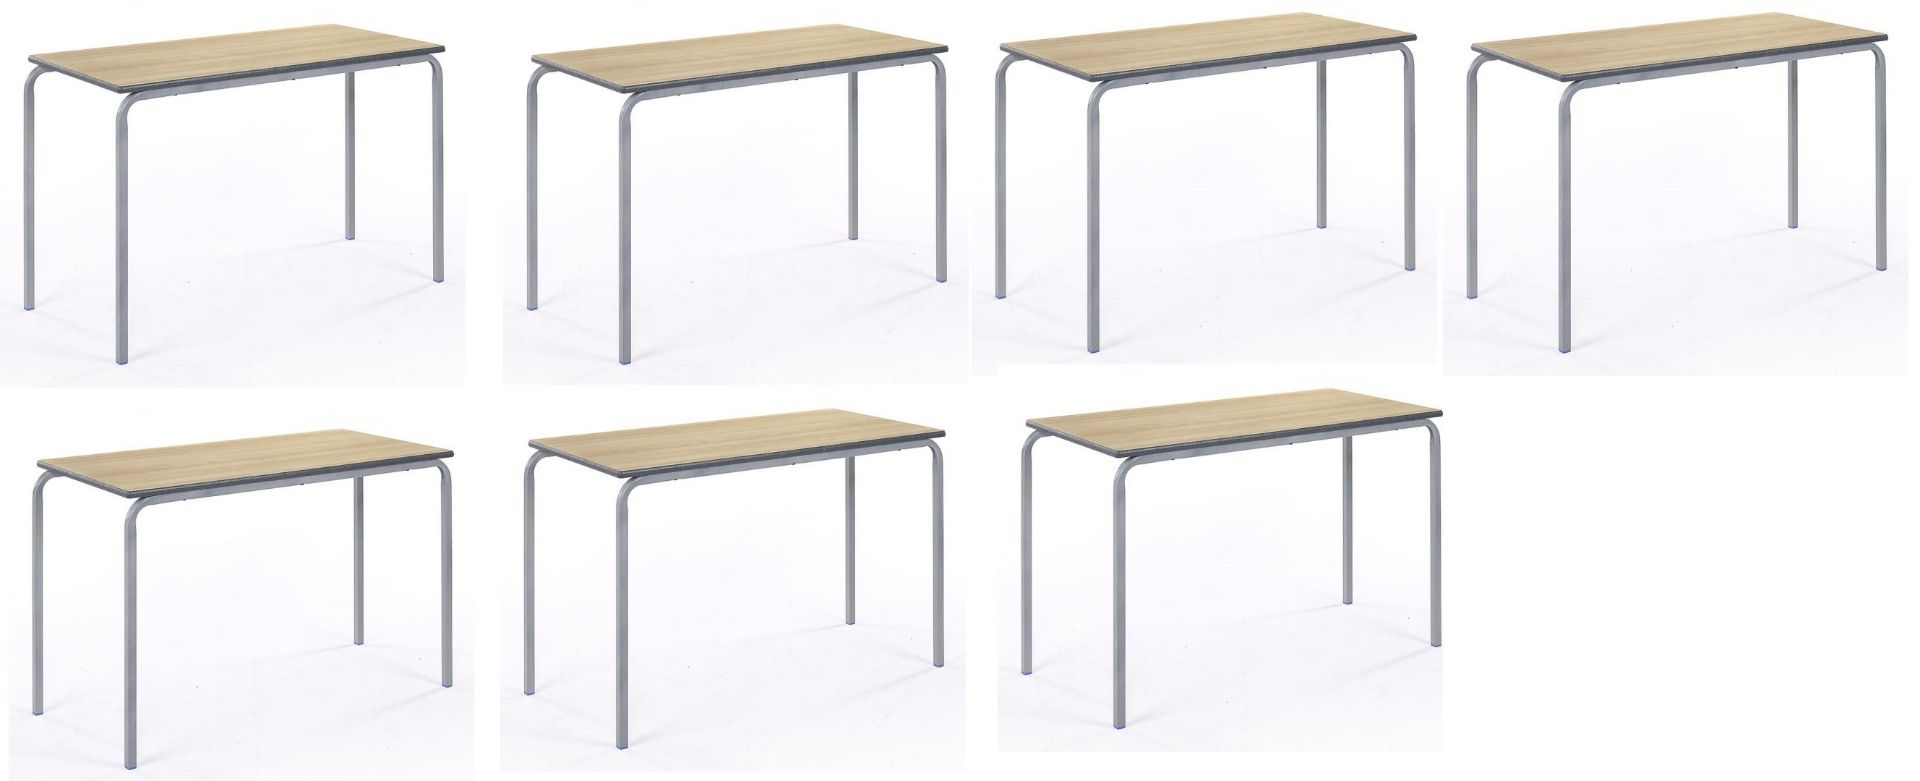 V Grade A A Lot Of Seven Stacking Tables ISP £381.60 (Elf) (Image May Vary Slightly From Item)